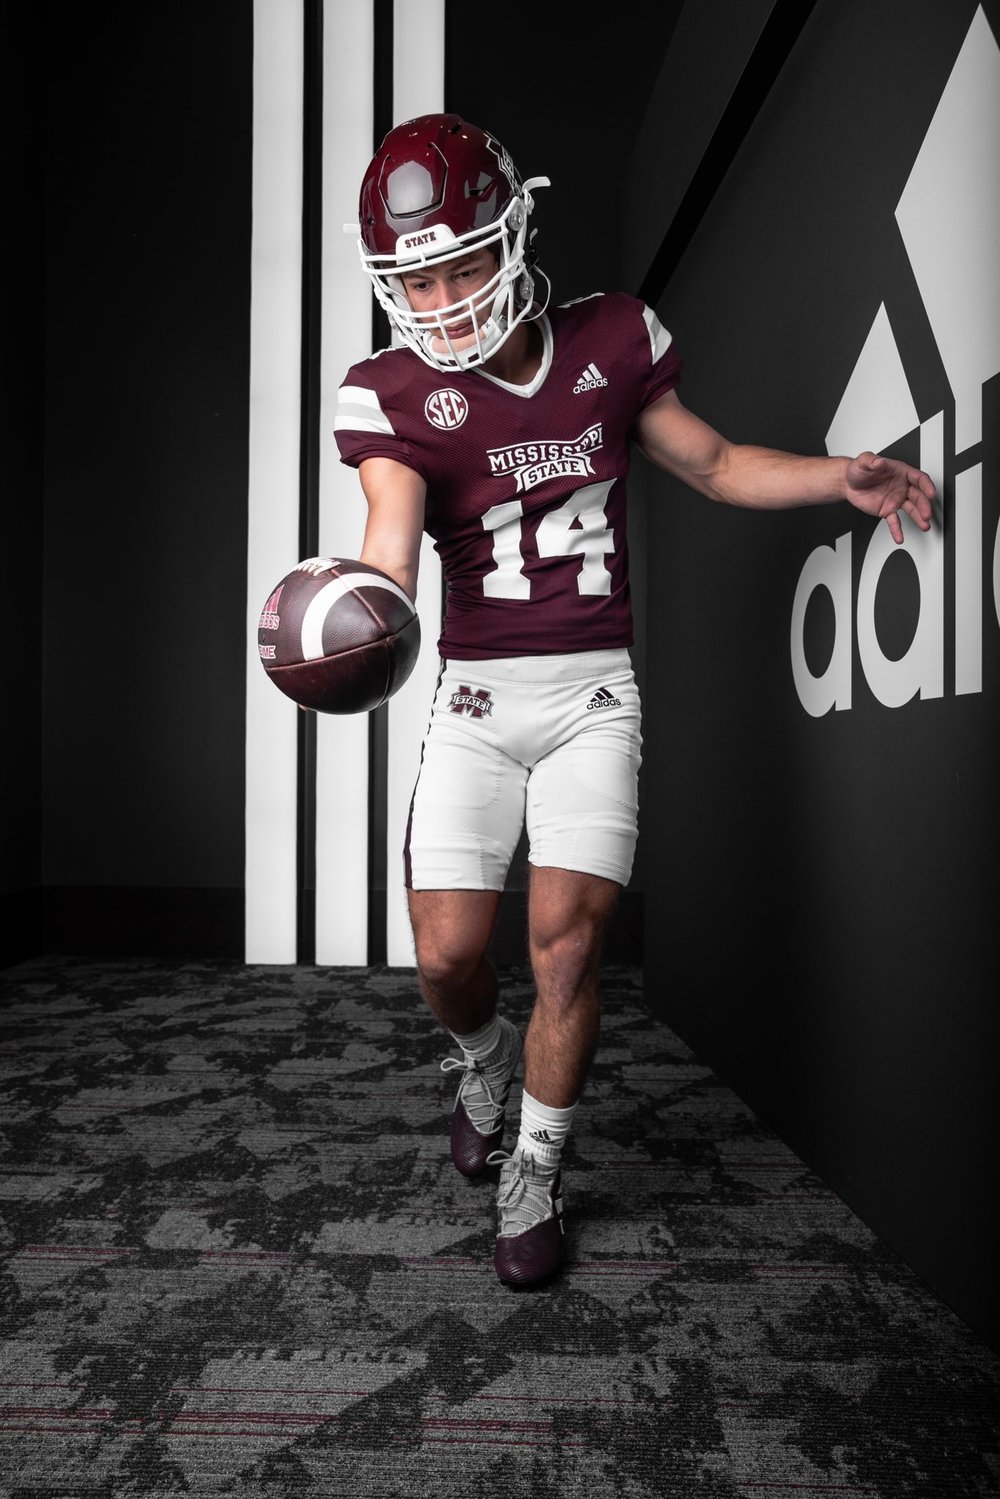 Mississippi State was the most recent destination for a visit from Gulf Shores’ Will Langston, a top-rated kicker and punter prospect. Already this offseason, Langston has visited the Troy Trojans and Memphis Tigers.